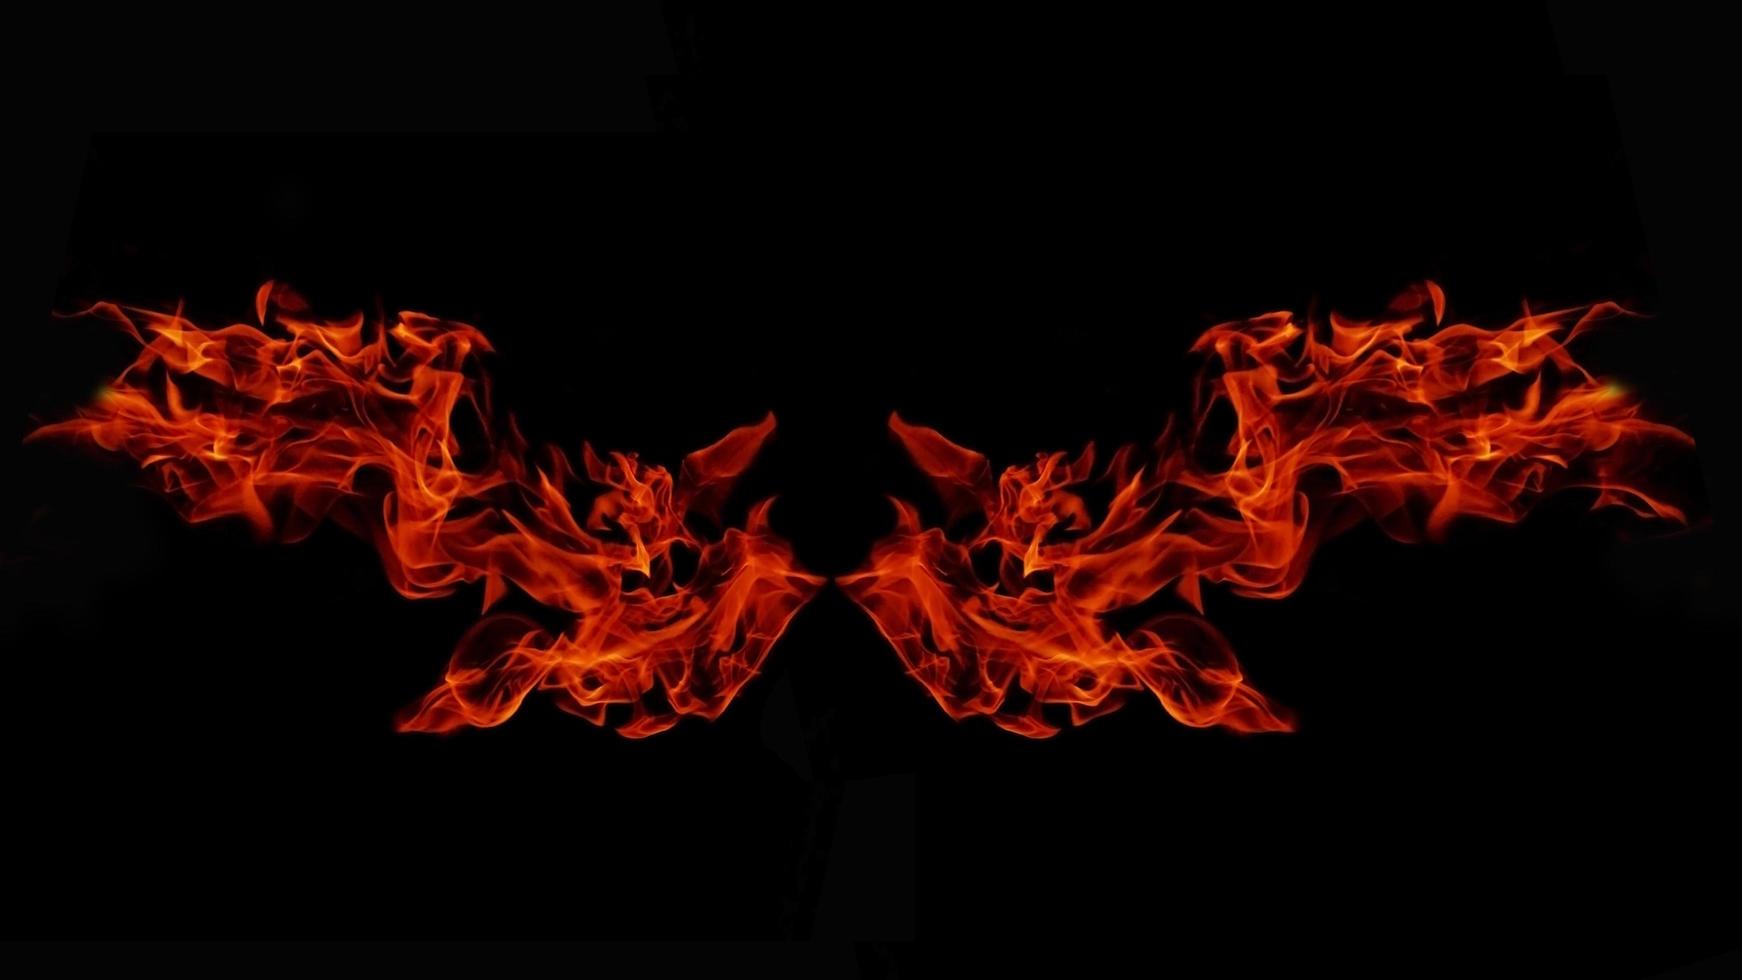 A beautiful flame shaped as imagined. like from hell, showing a dangerous and fiery fervor, black background photo